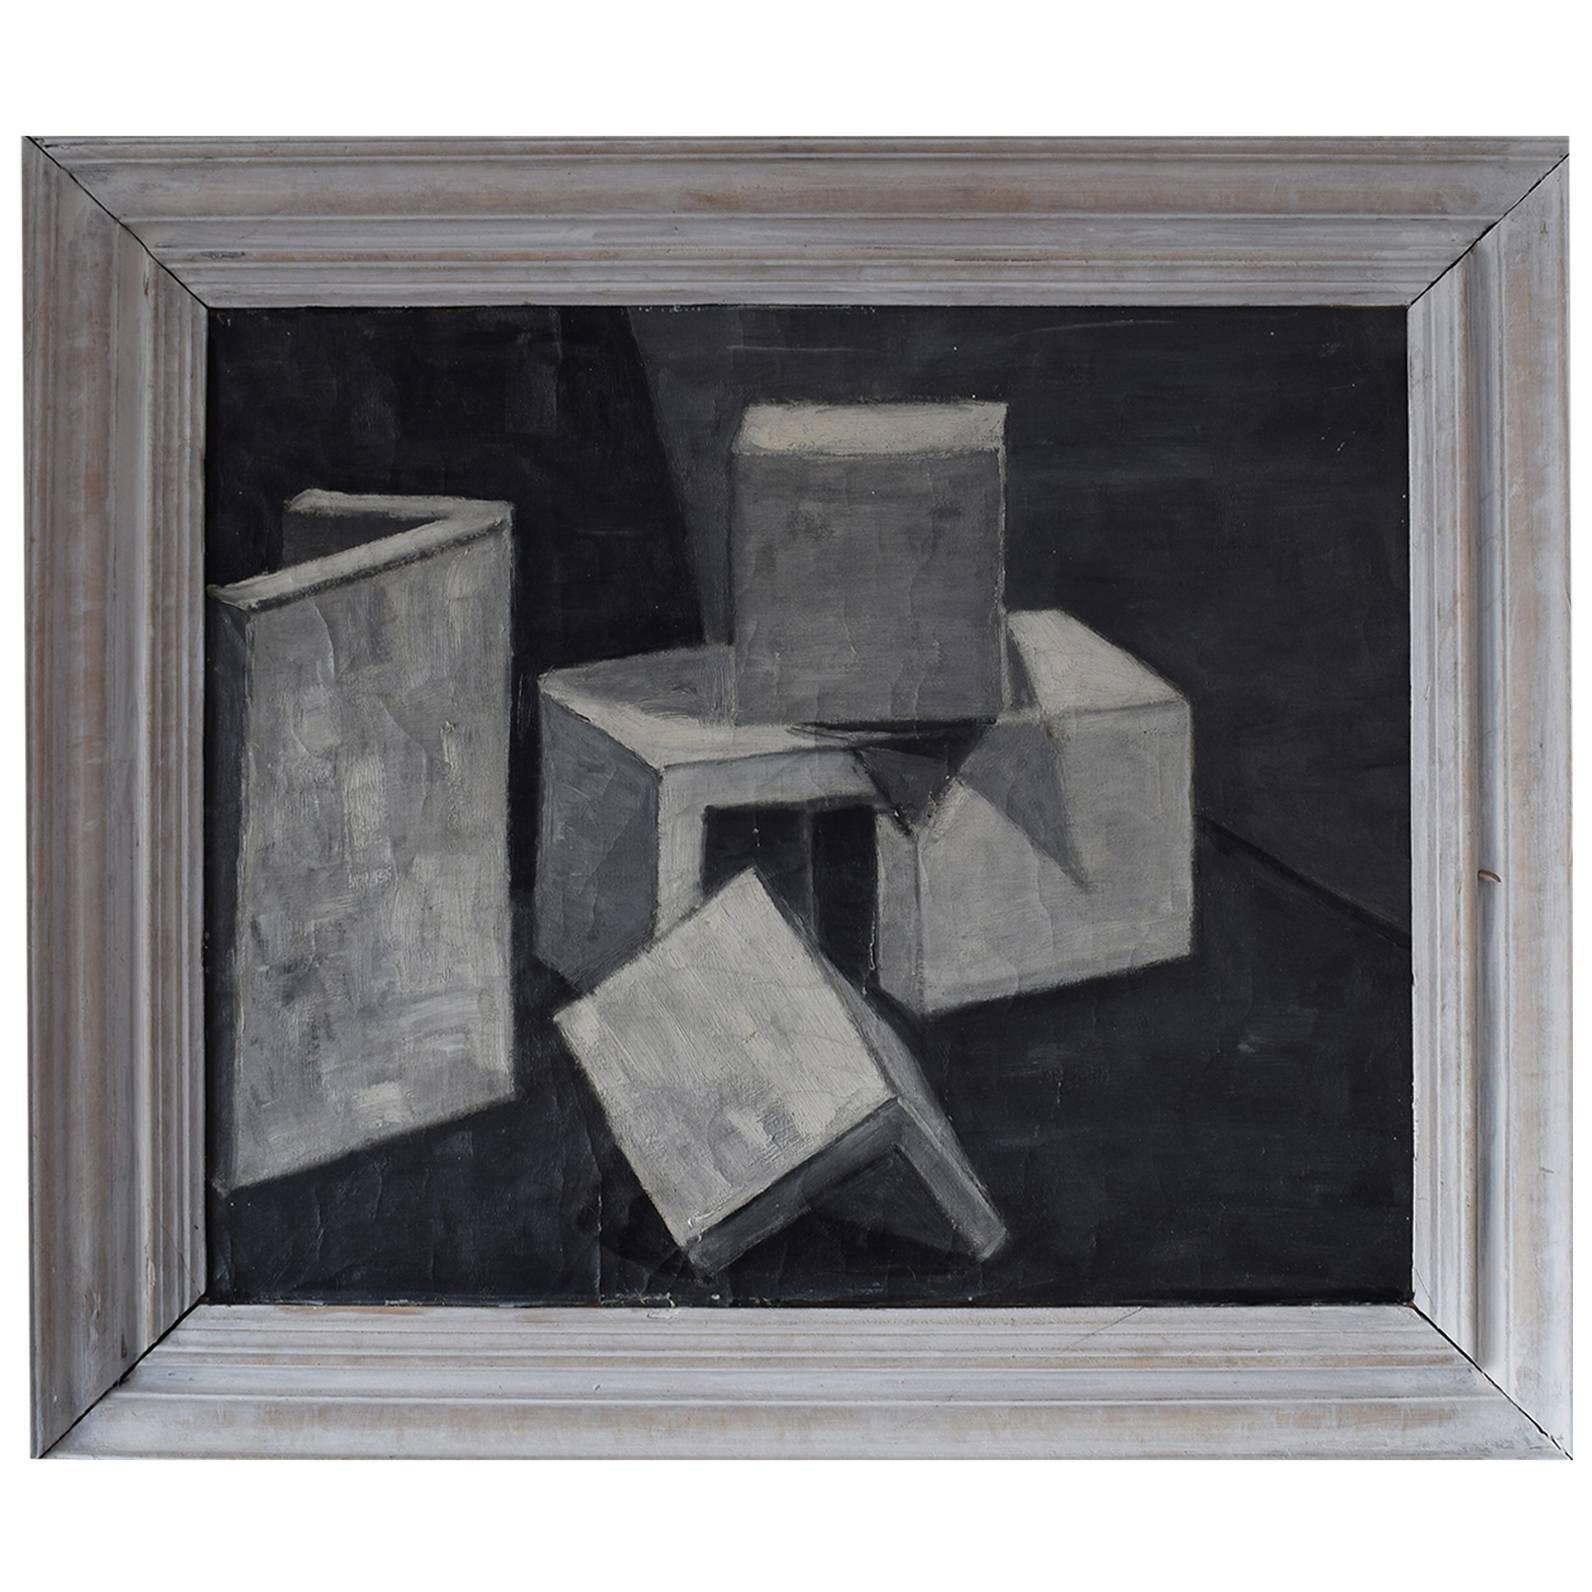 Unknown, Geometric Abstract in Monochrome, English, Mid-20th Century